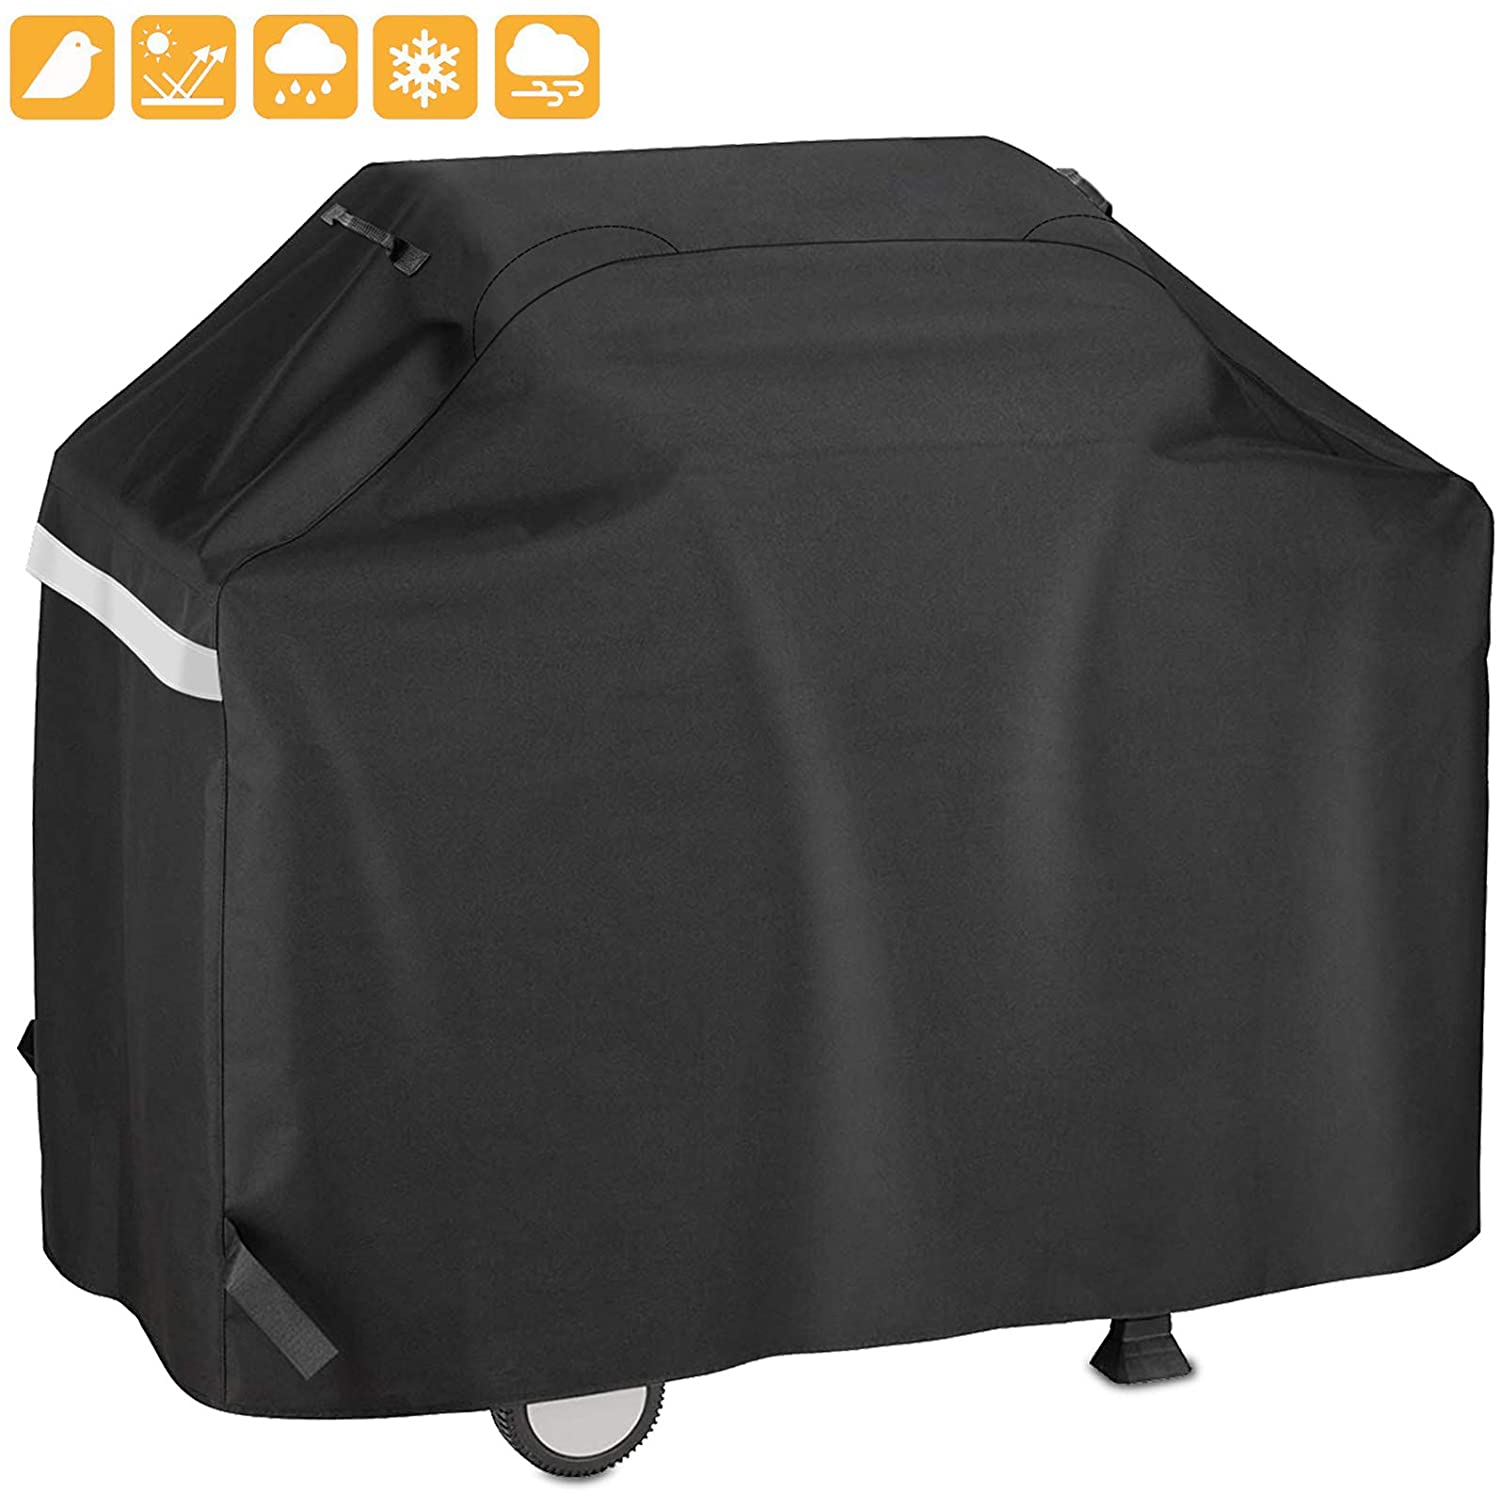 65 Inch Grill Cover for 3 to 5 Burners Gas Grills, Heavy Duty Waterproof, Fade Resistant BBQ